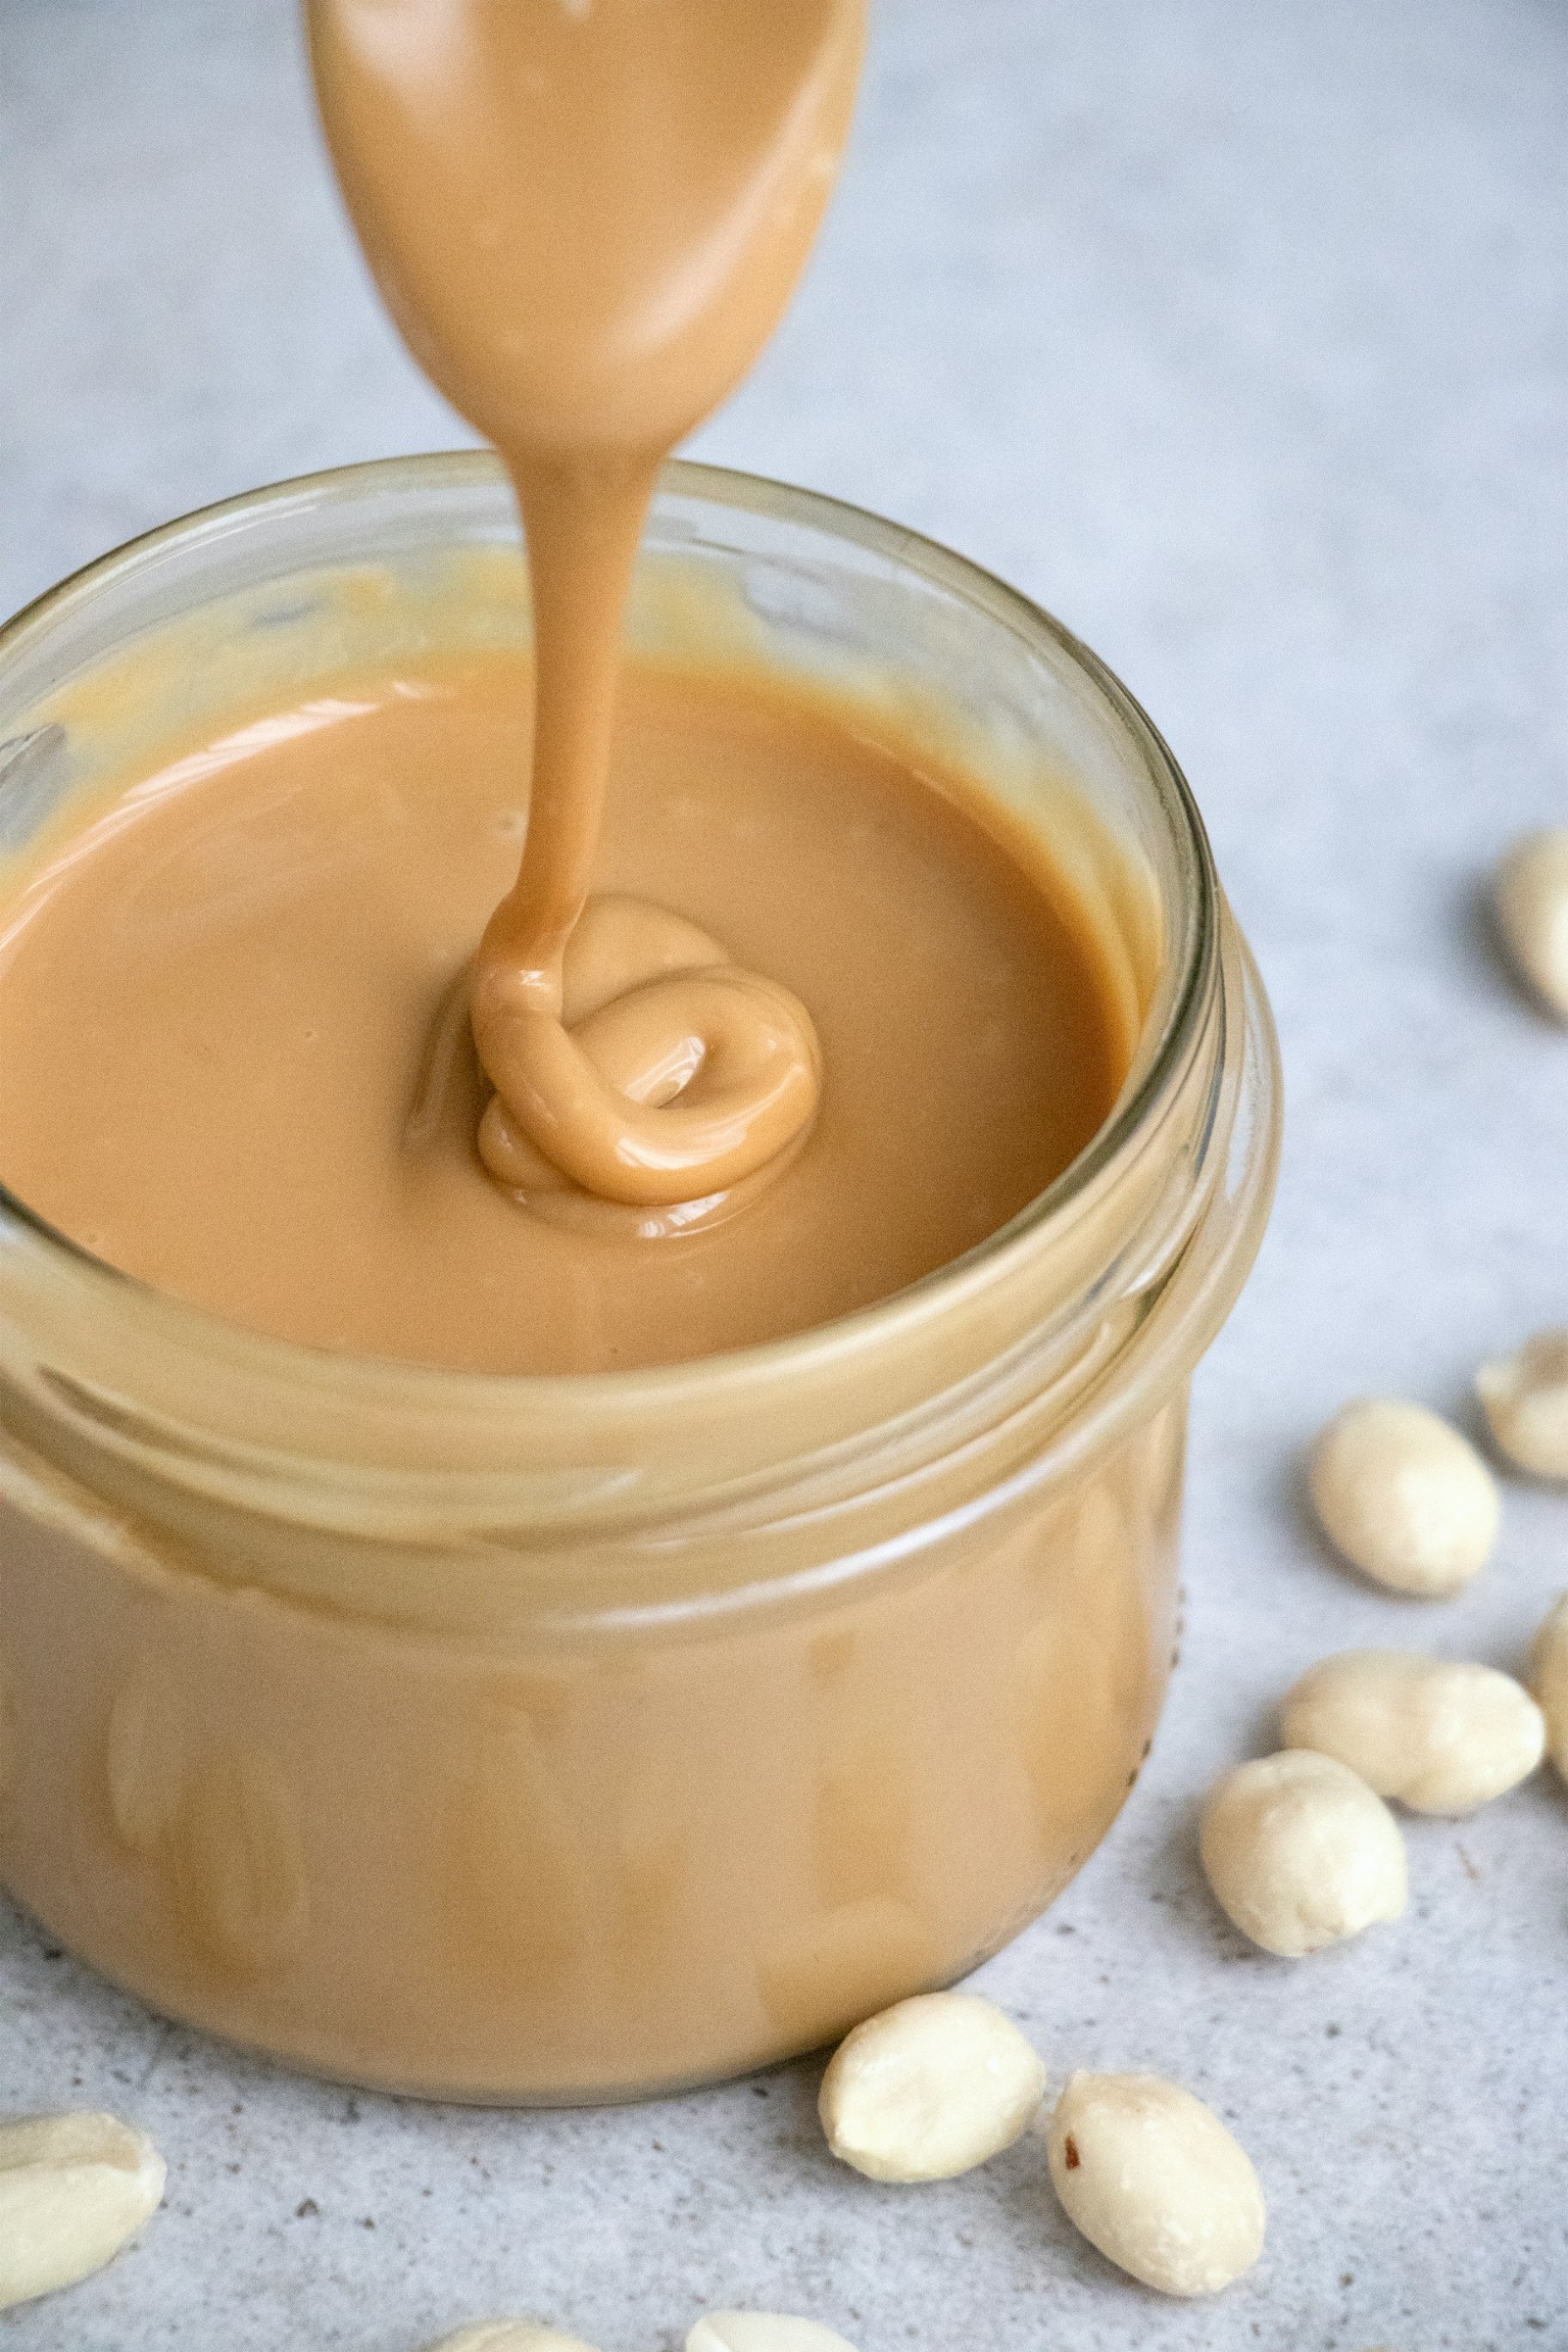 Peanut butter being poured into a glass jar with peanuts scattered around.